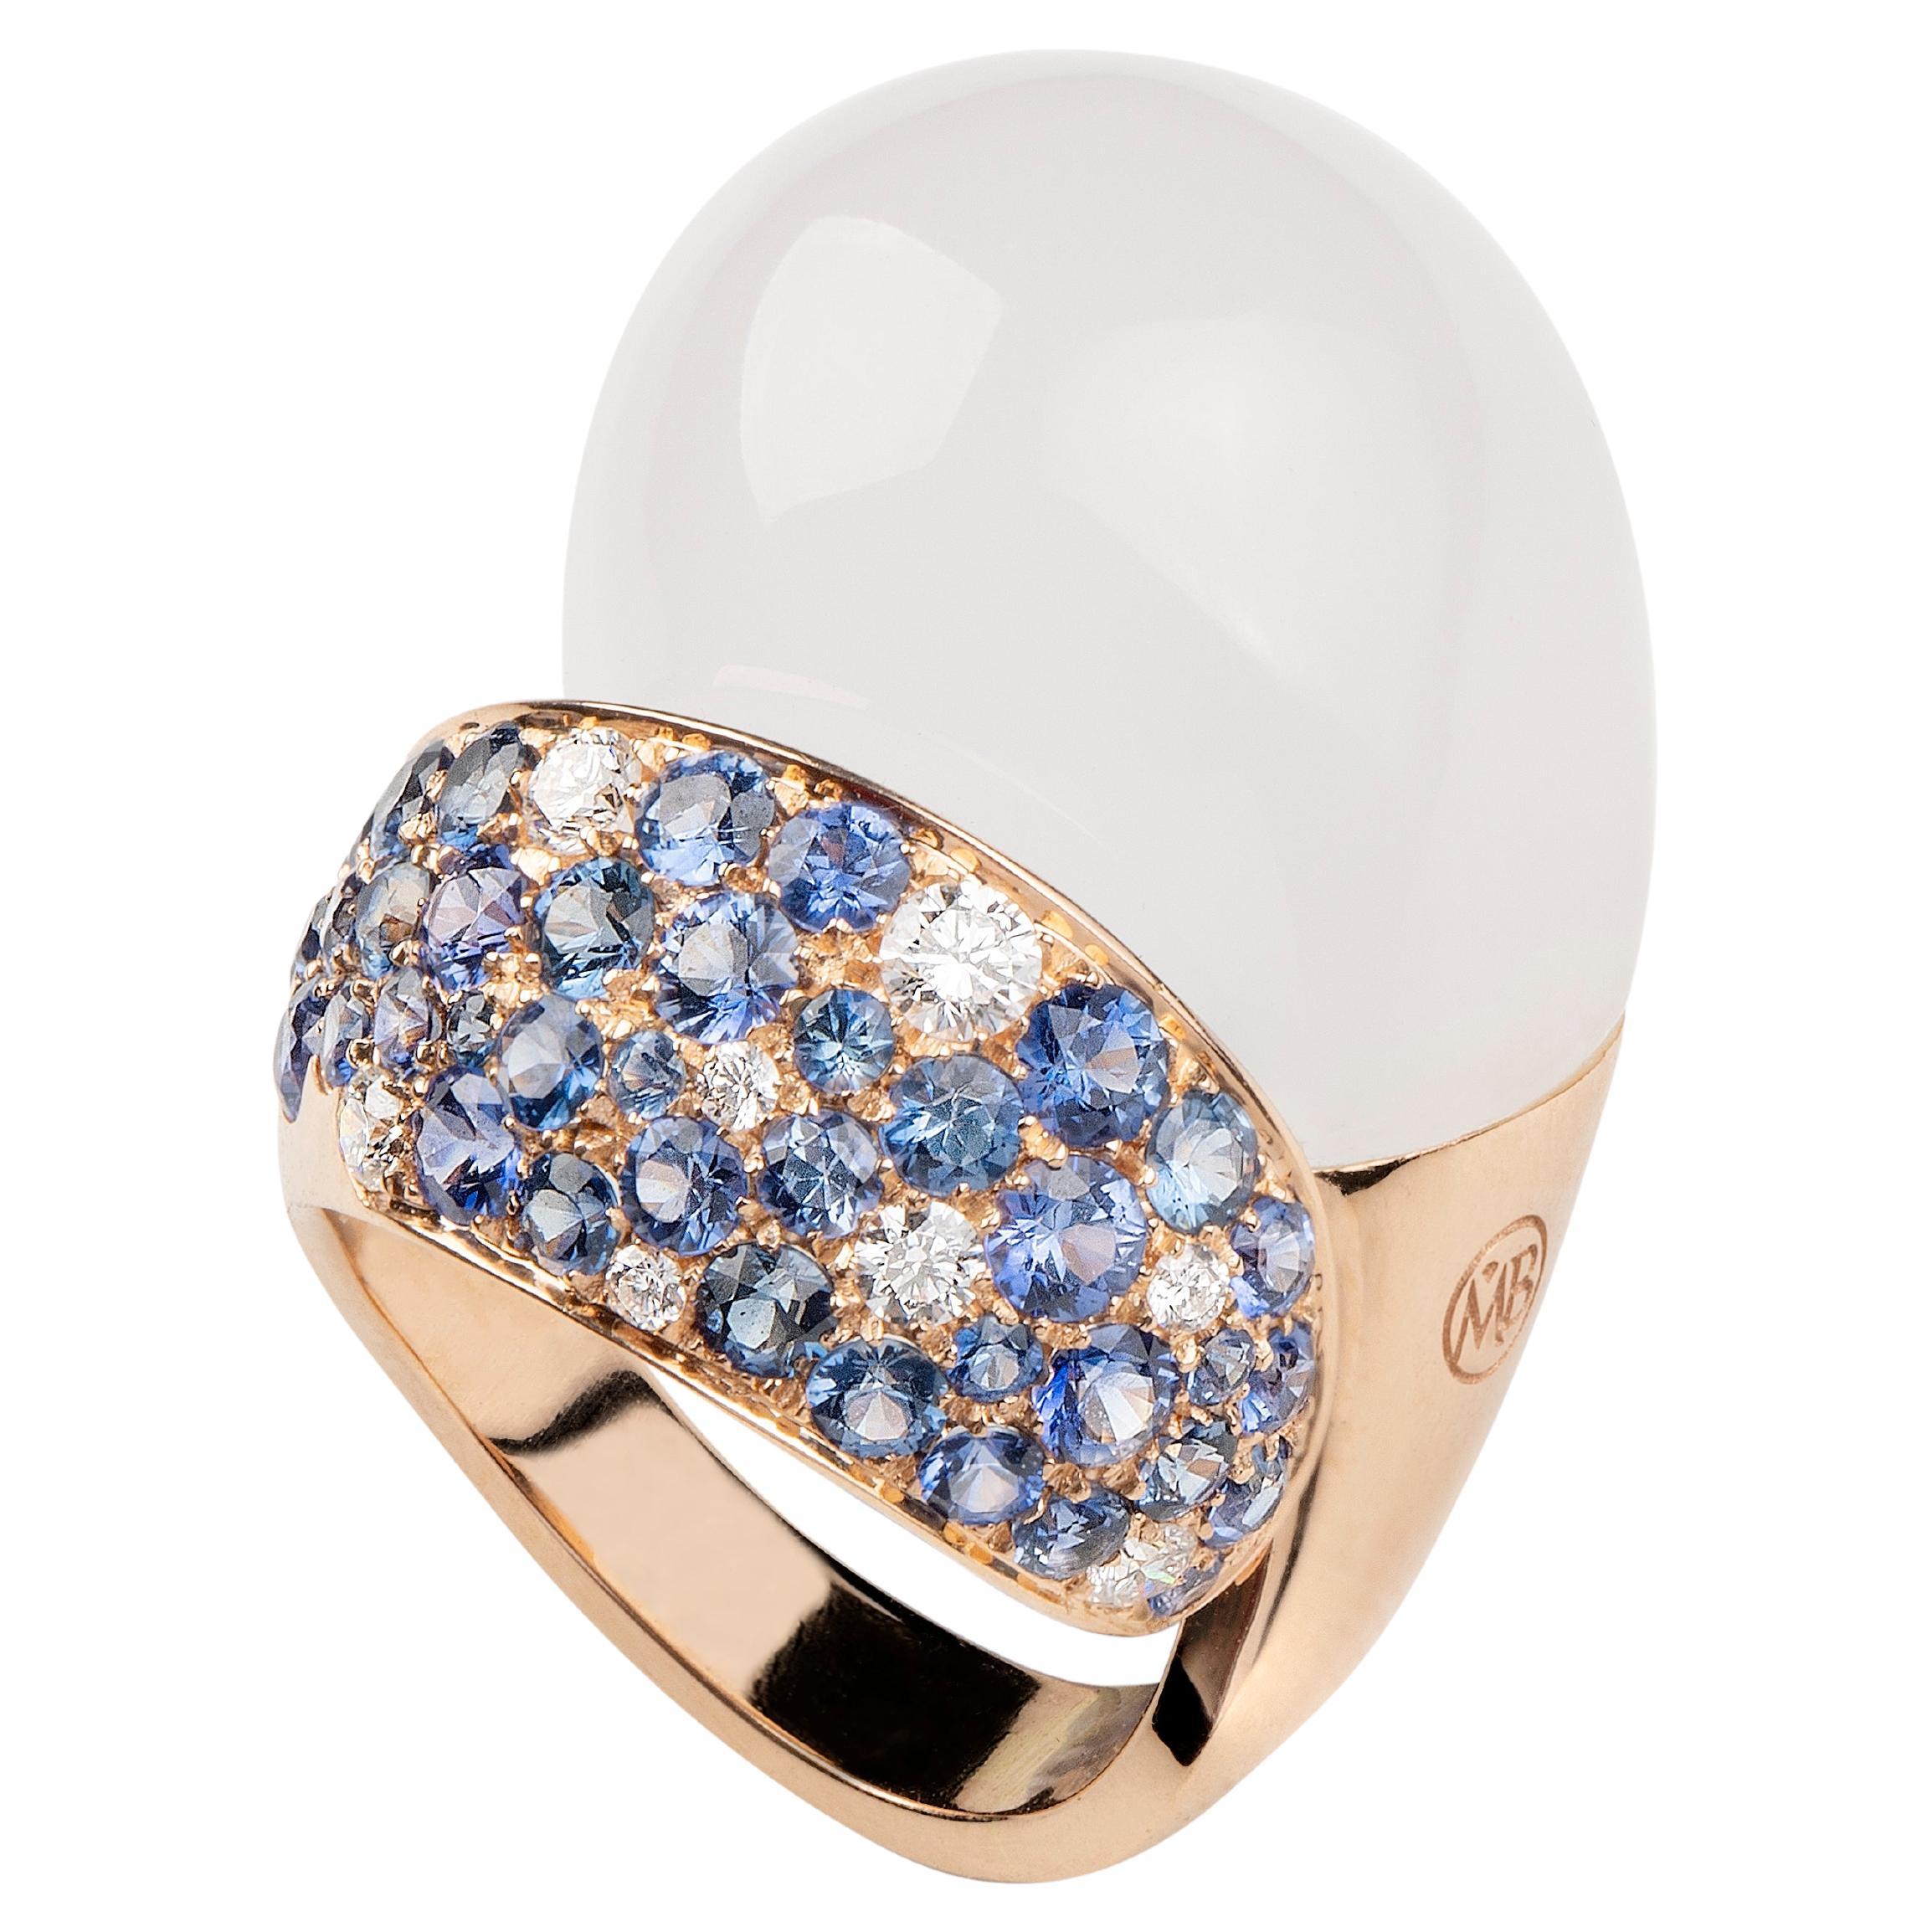 Diamond Blue Sapphire White Quartz 18 KT Rose Gold Made in Italy Moony Ring For Sale